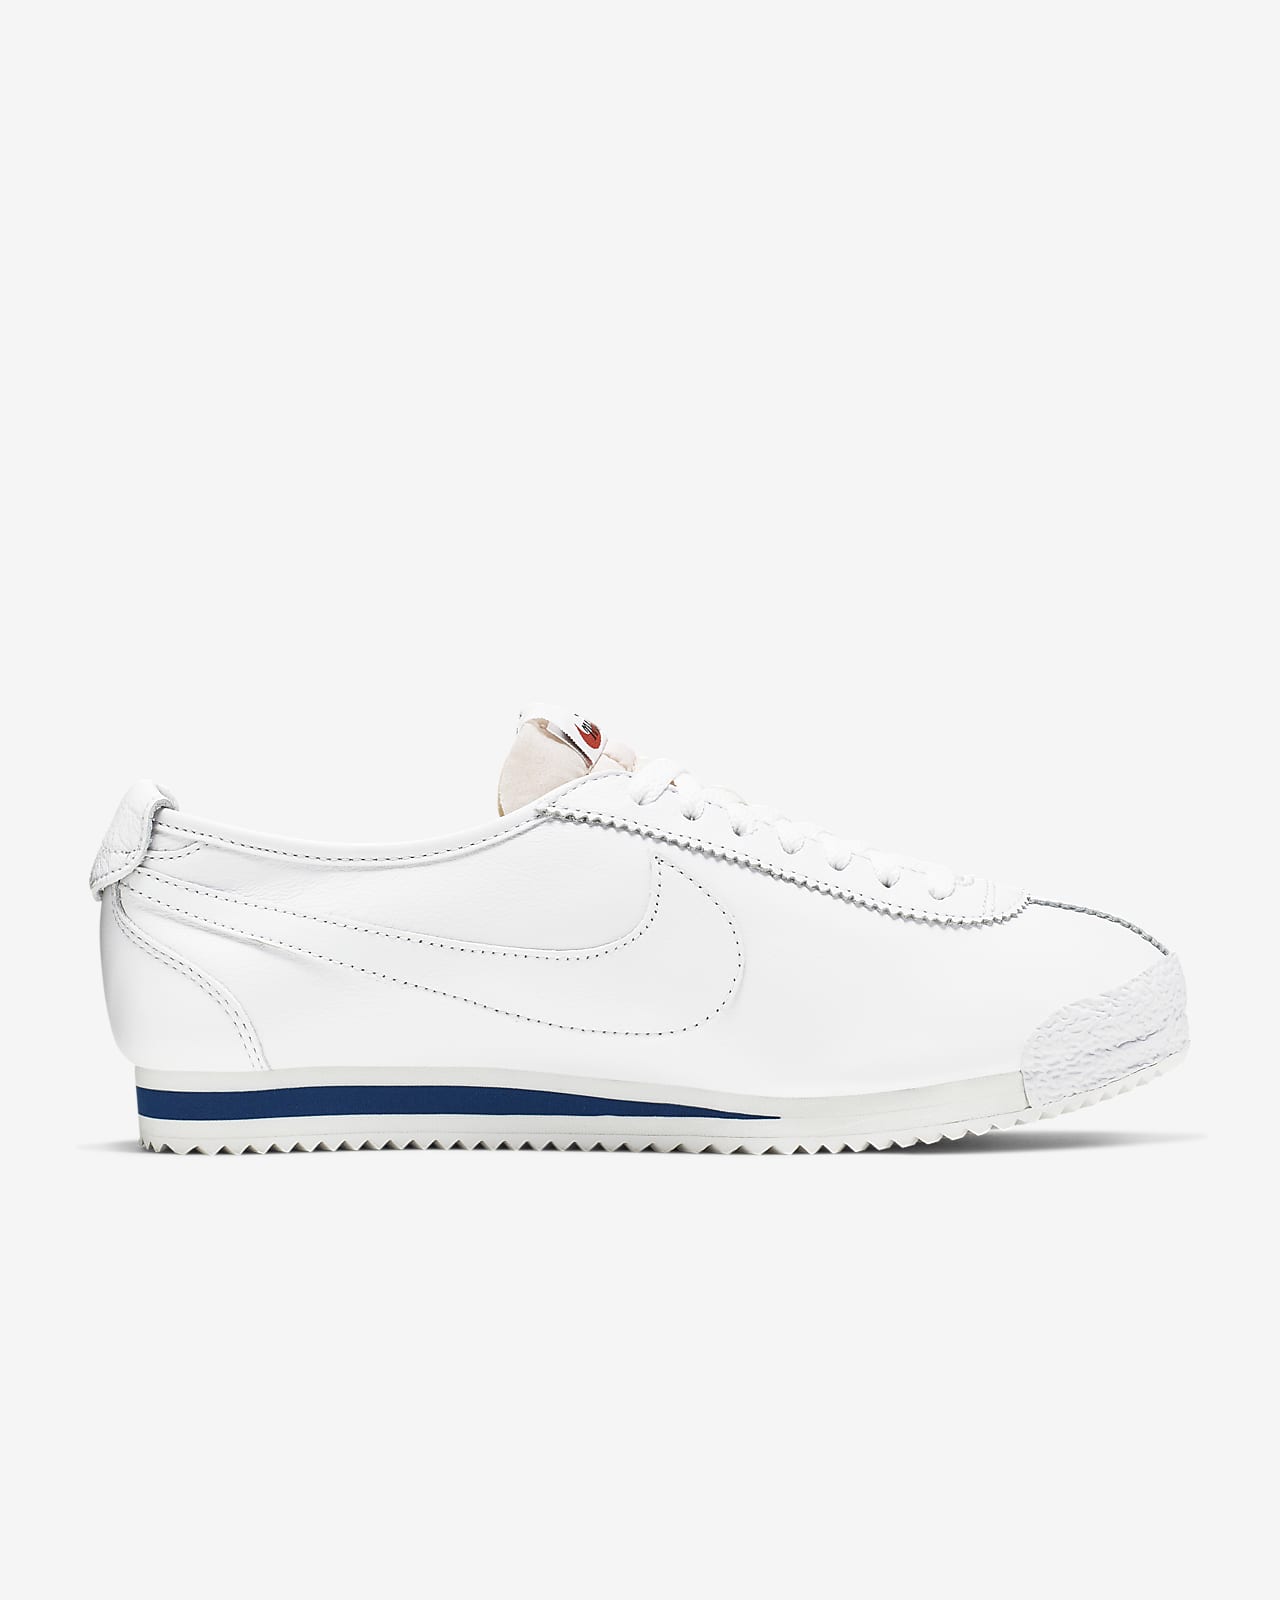 nike shoes cortez price philippines